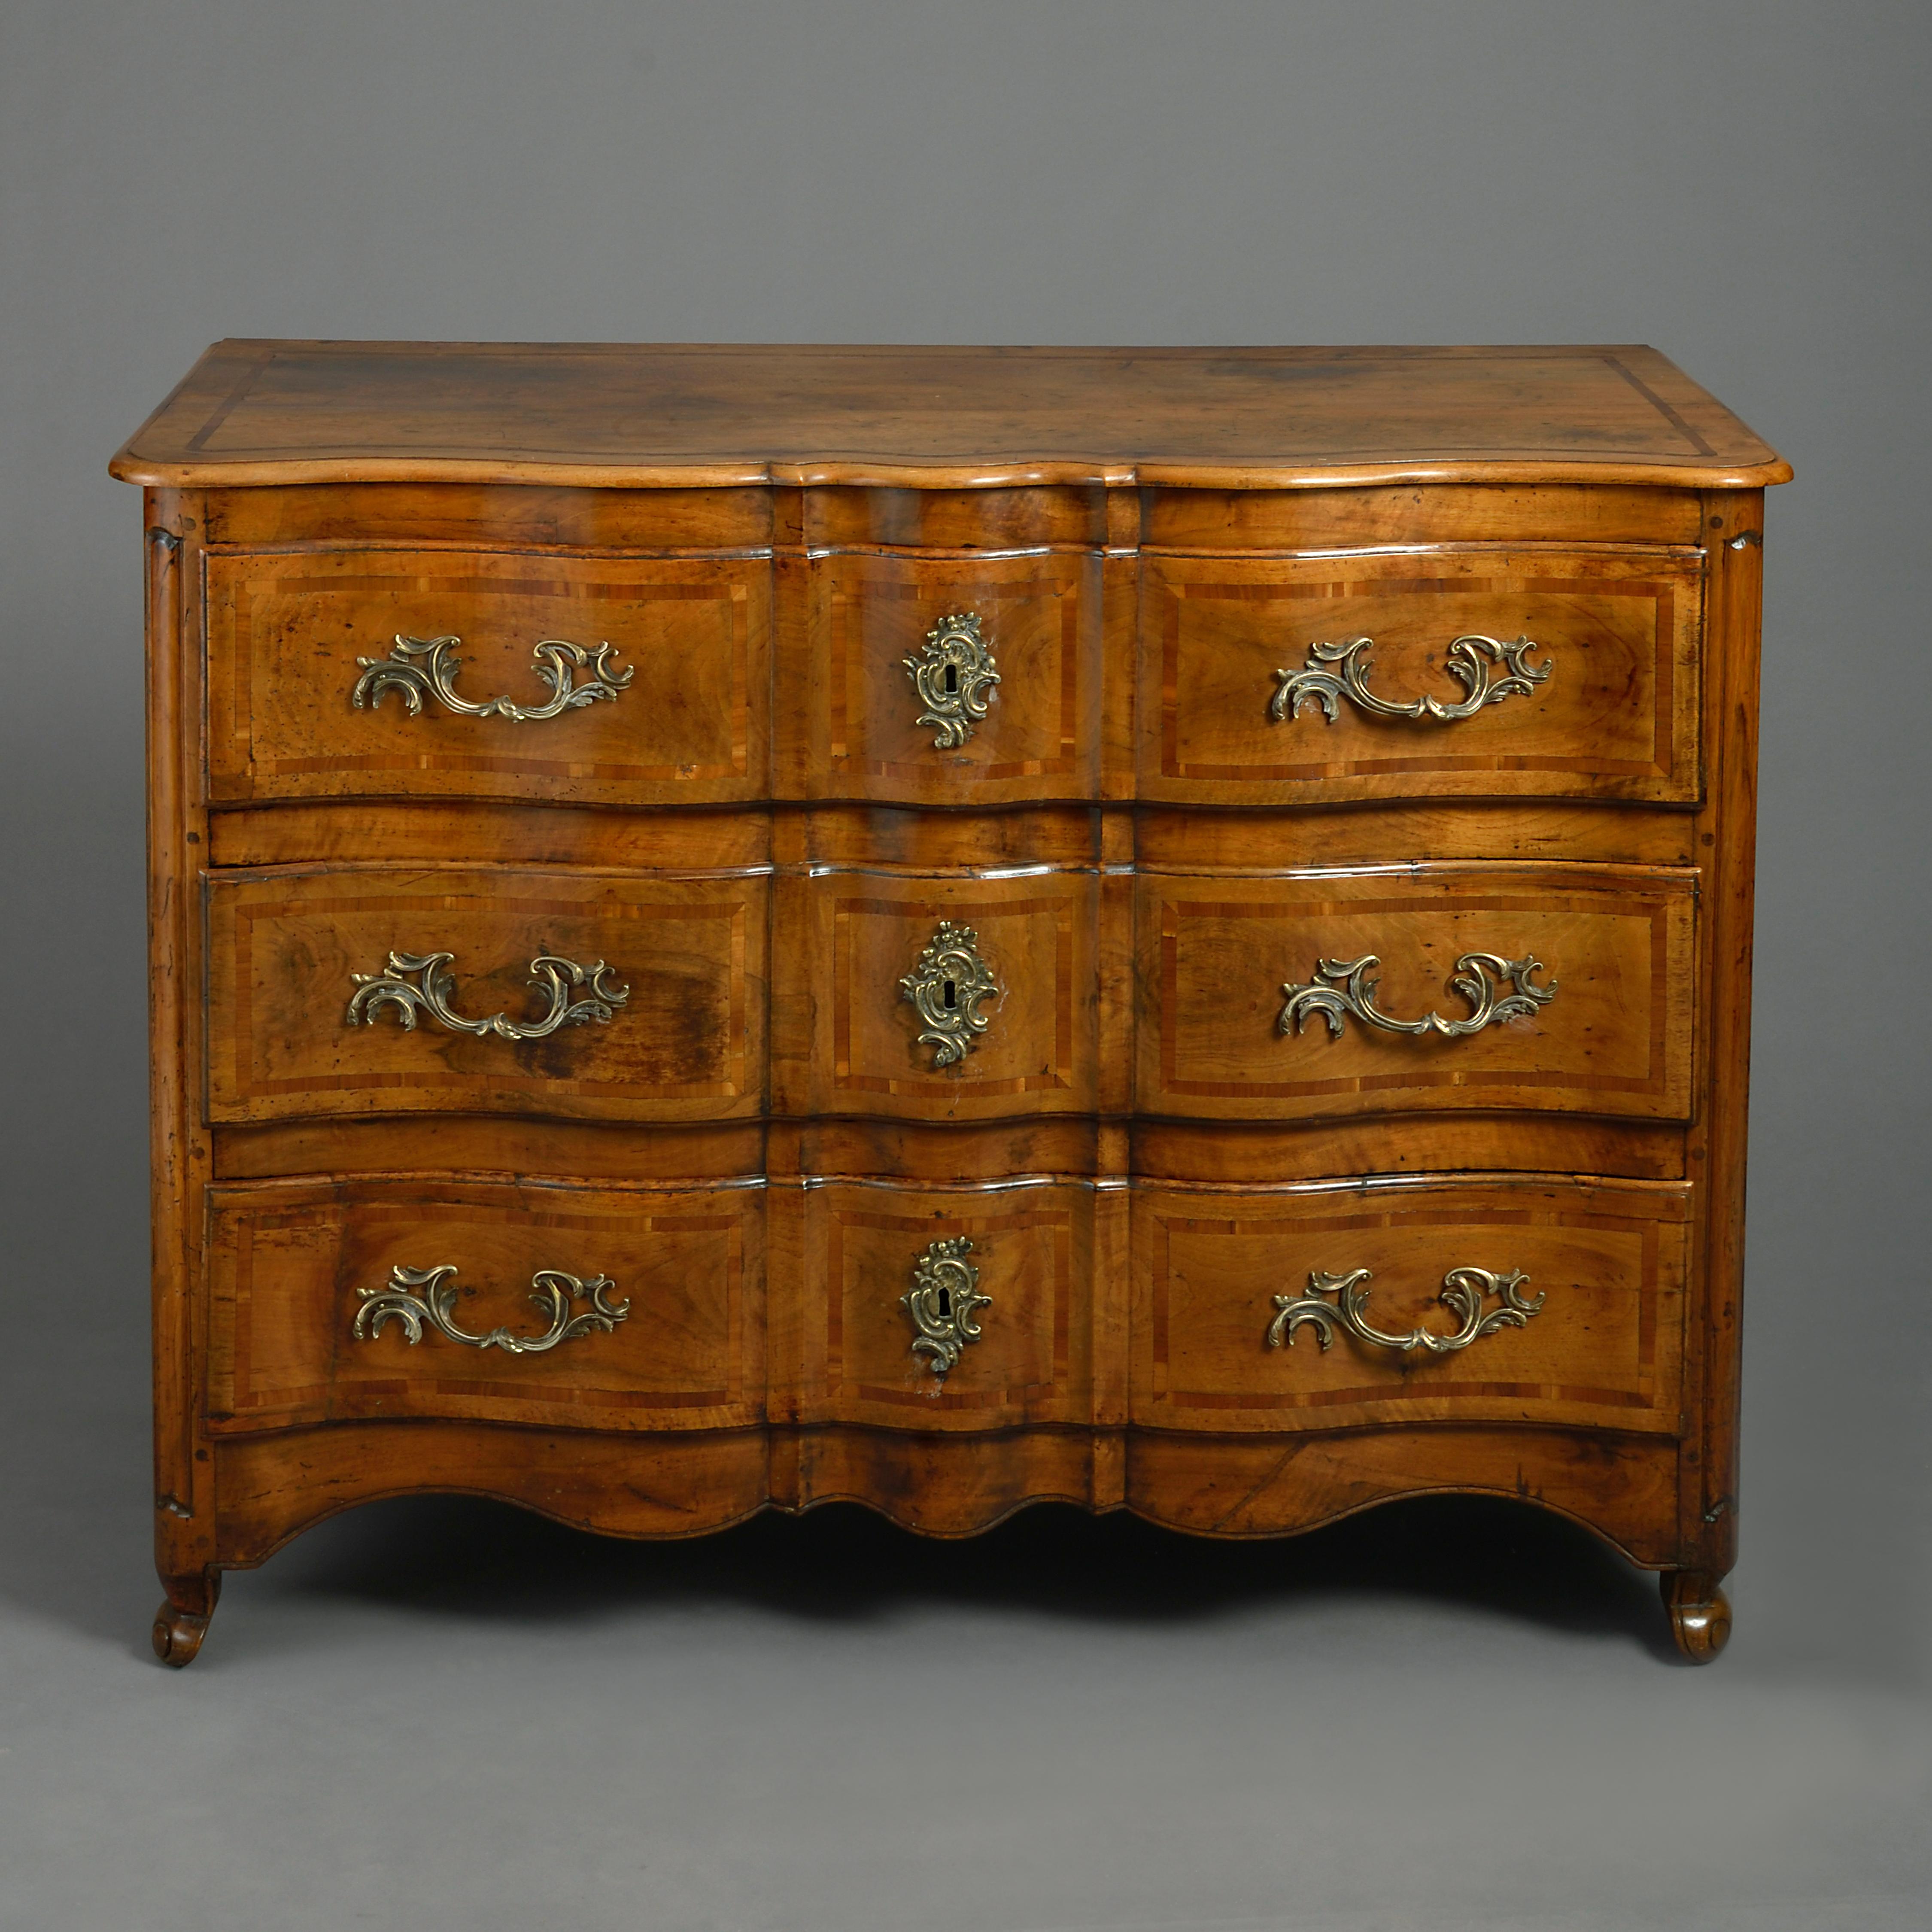 A mid-18th century Louis XV period walnut rococo commode with ripple front, the overhanging top above three inlaid drawers with scrolling brass handles, the sides with paneling, all raised upon cabriole legs.